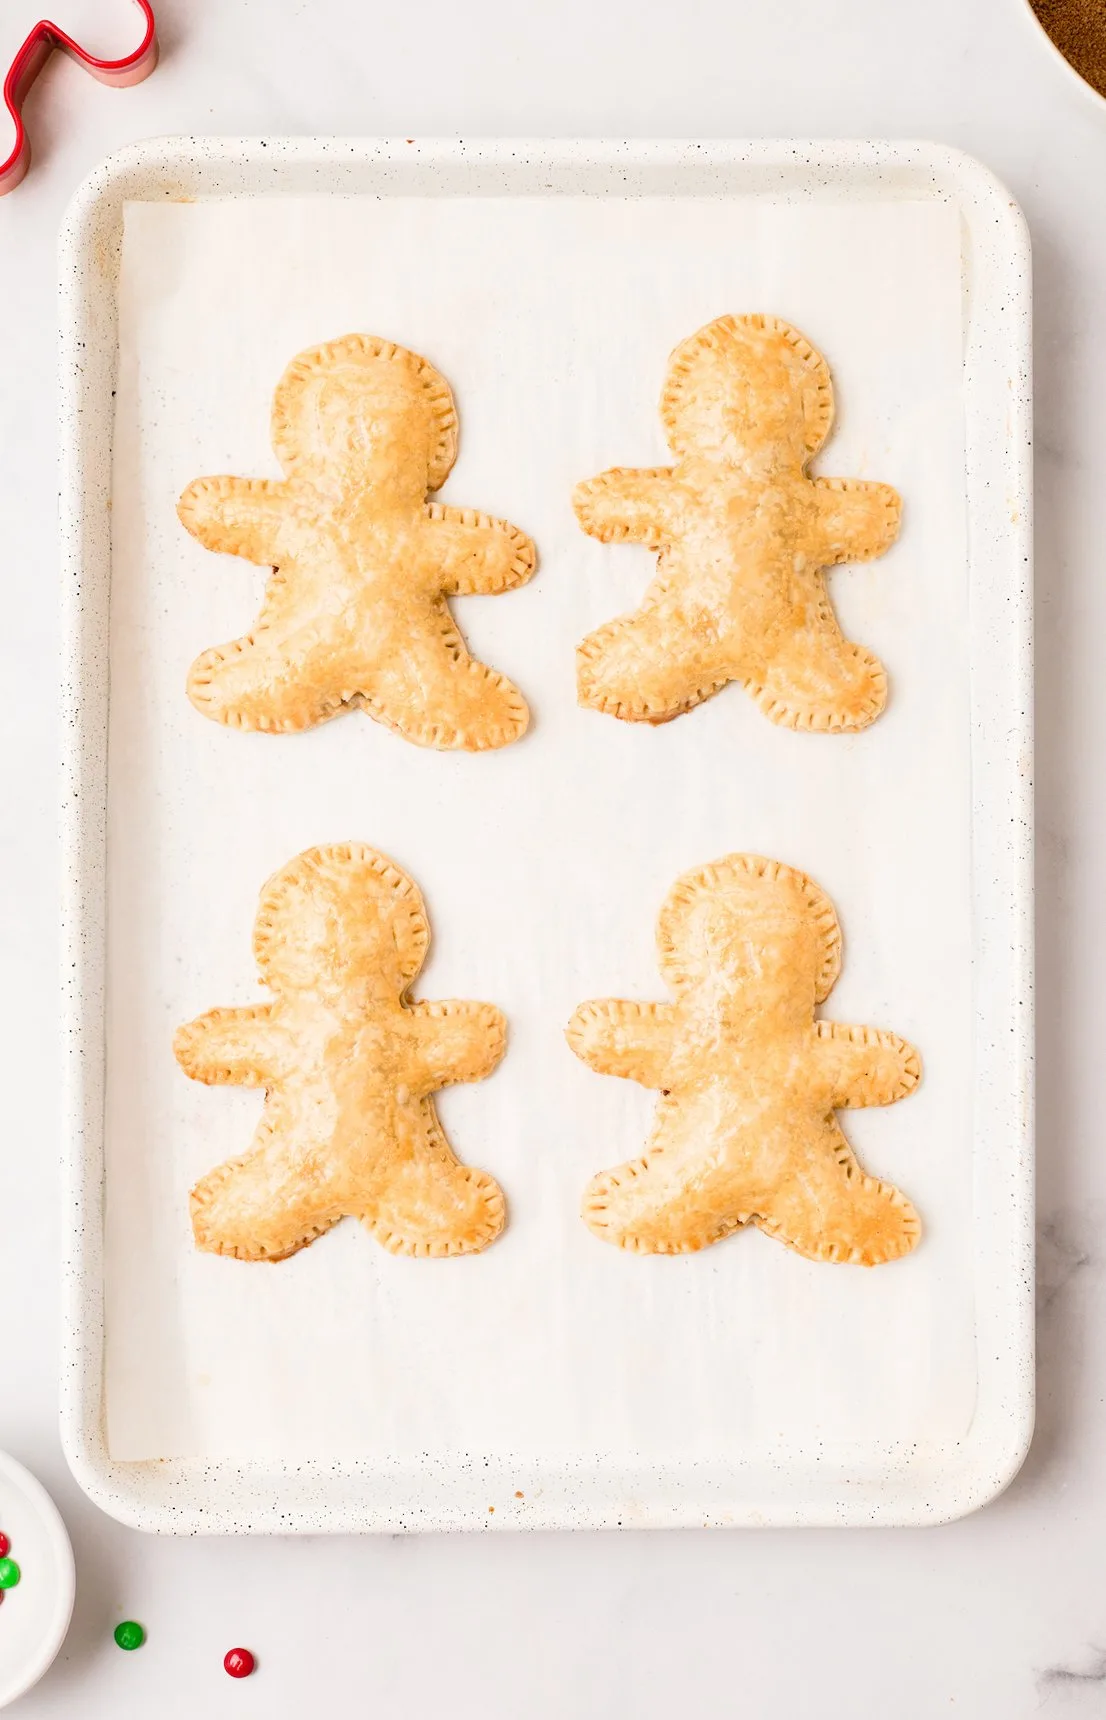 prepared gingerbread men poptarts before being placed in oven